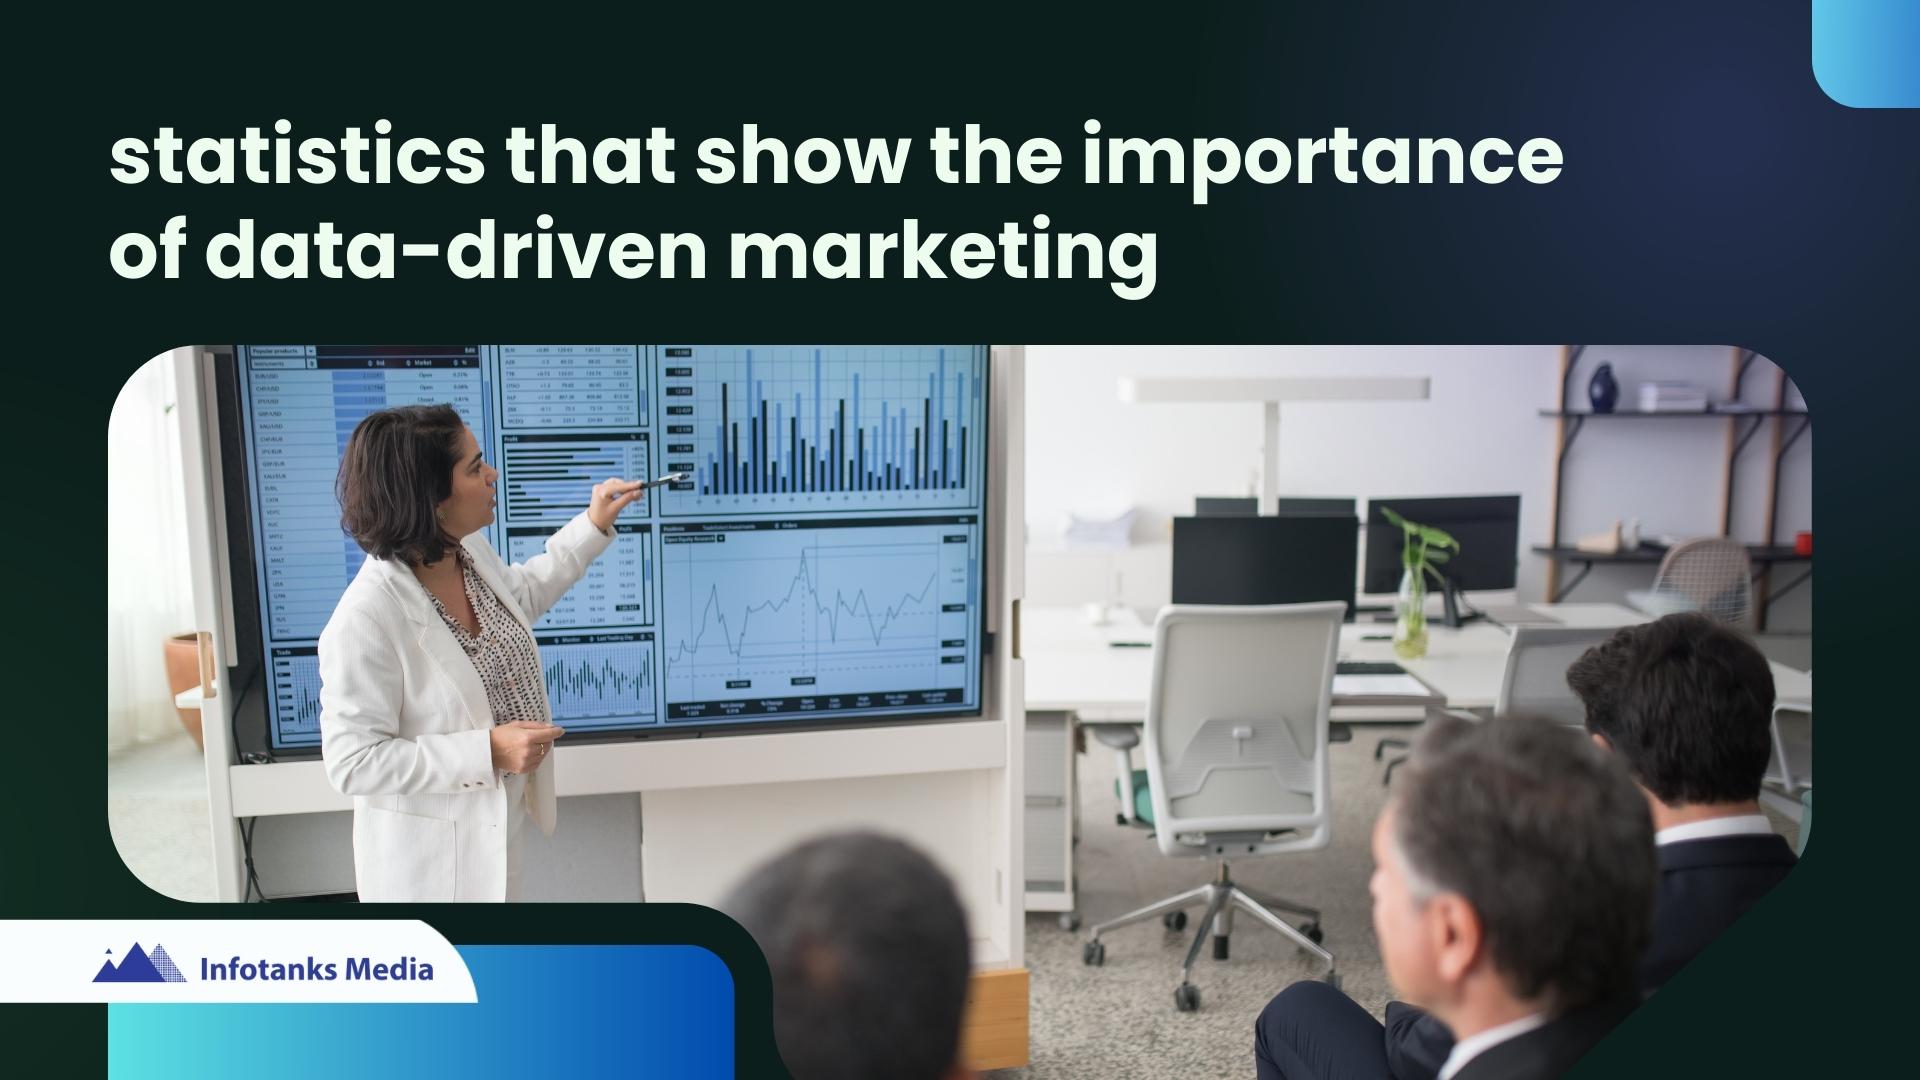 Research shows the following statistics about data-driven marketing